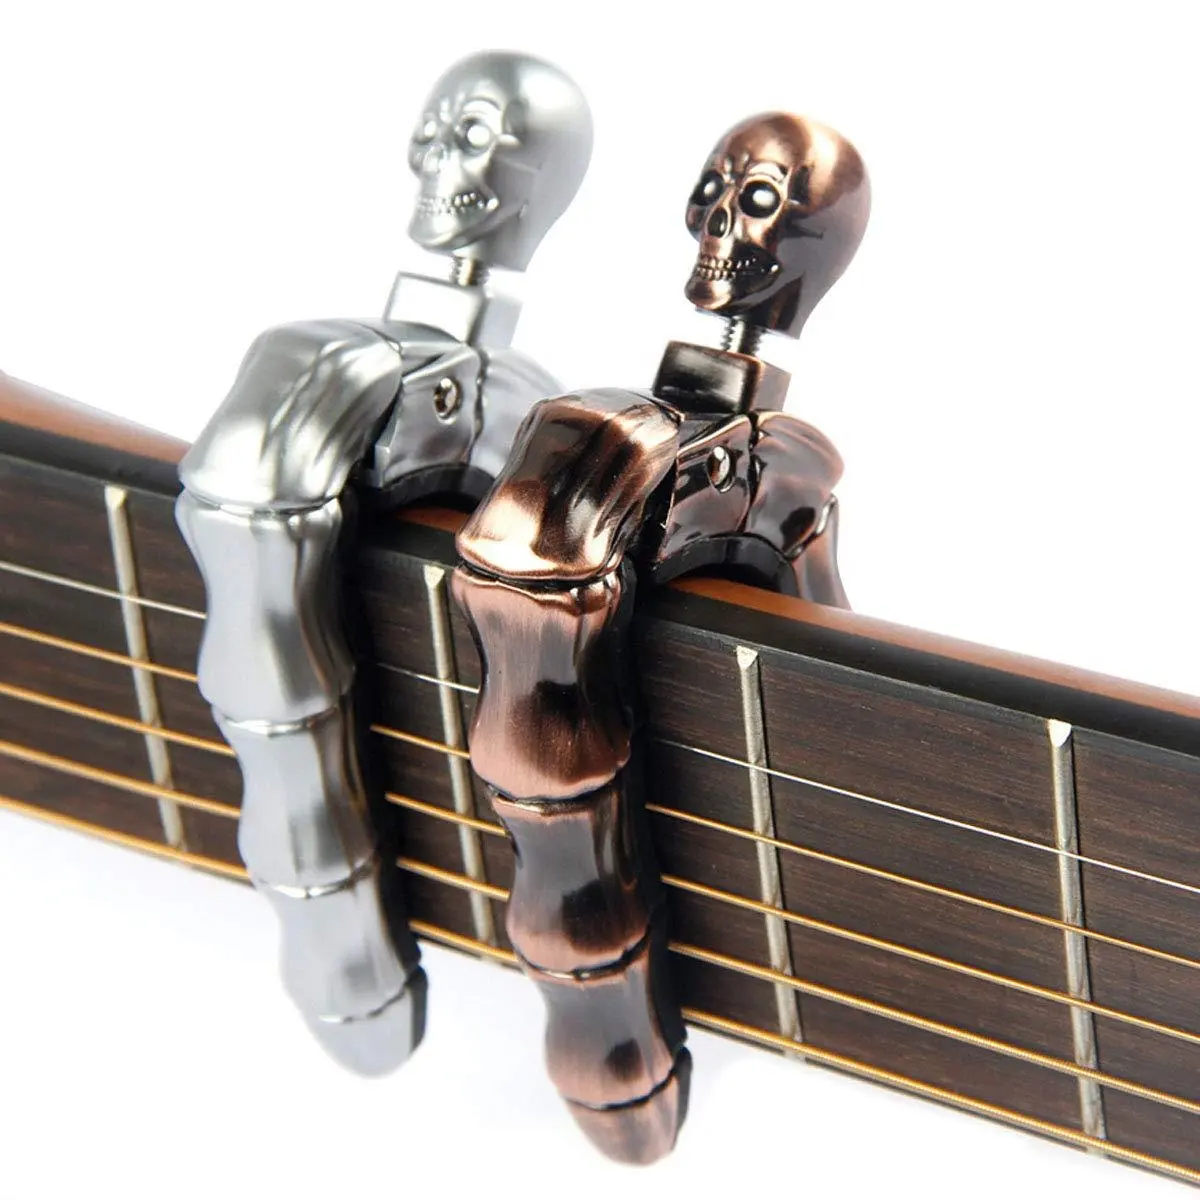 Machine Heads 2R 2L Closed Aluminum Alloy Machine Heads String Tuning Key Pegs Tuners for Ukulele